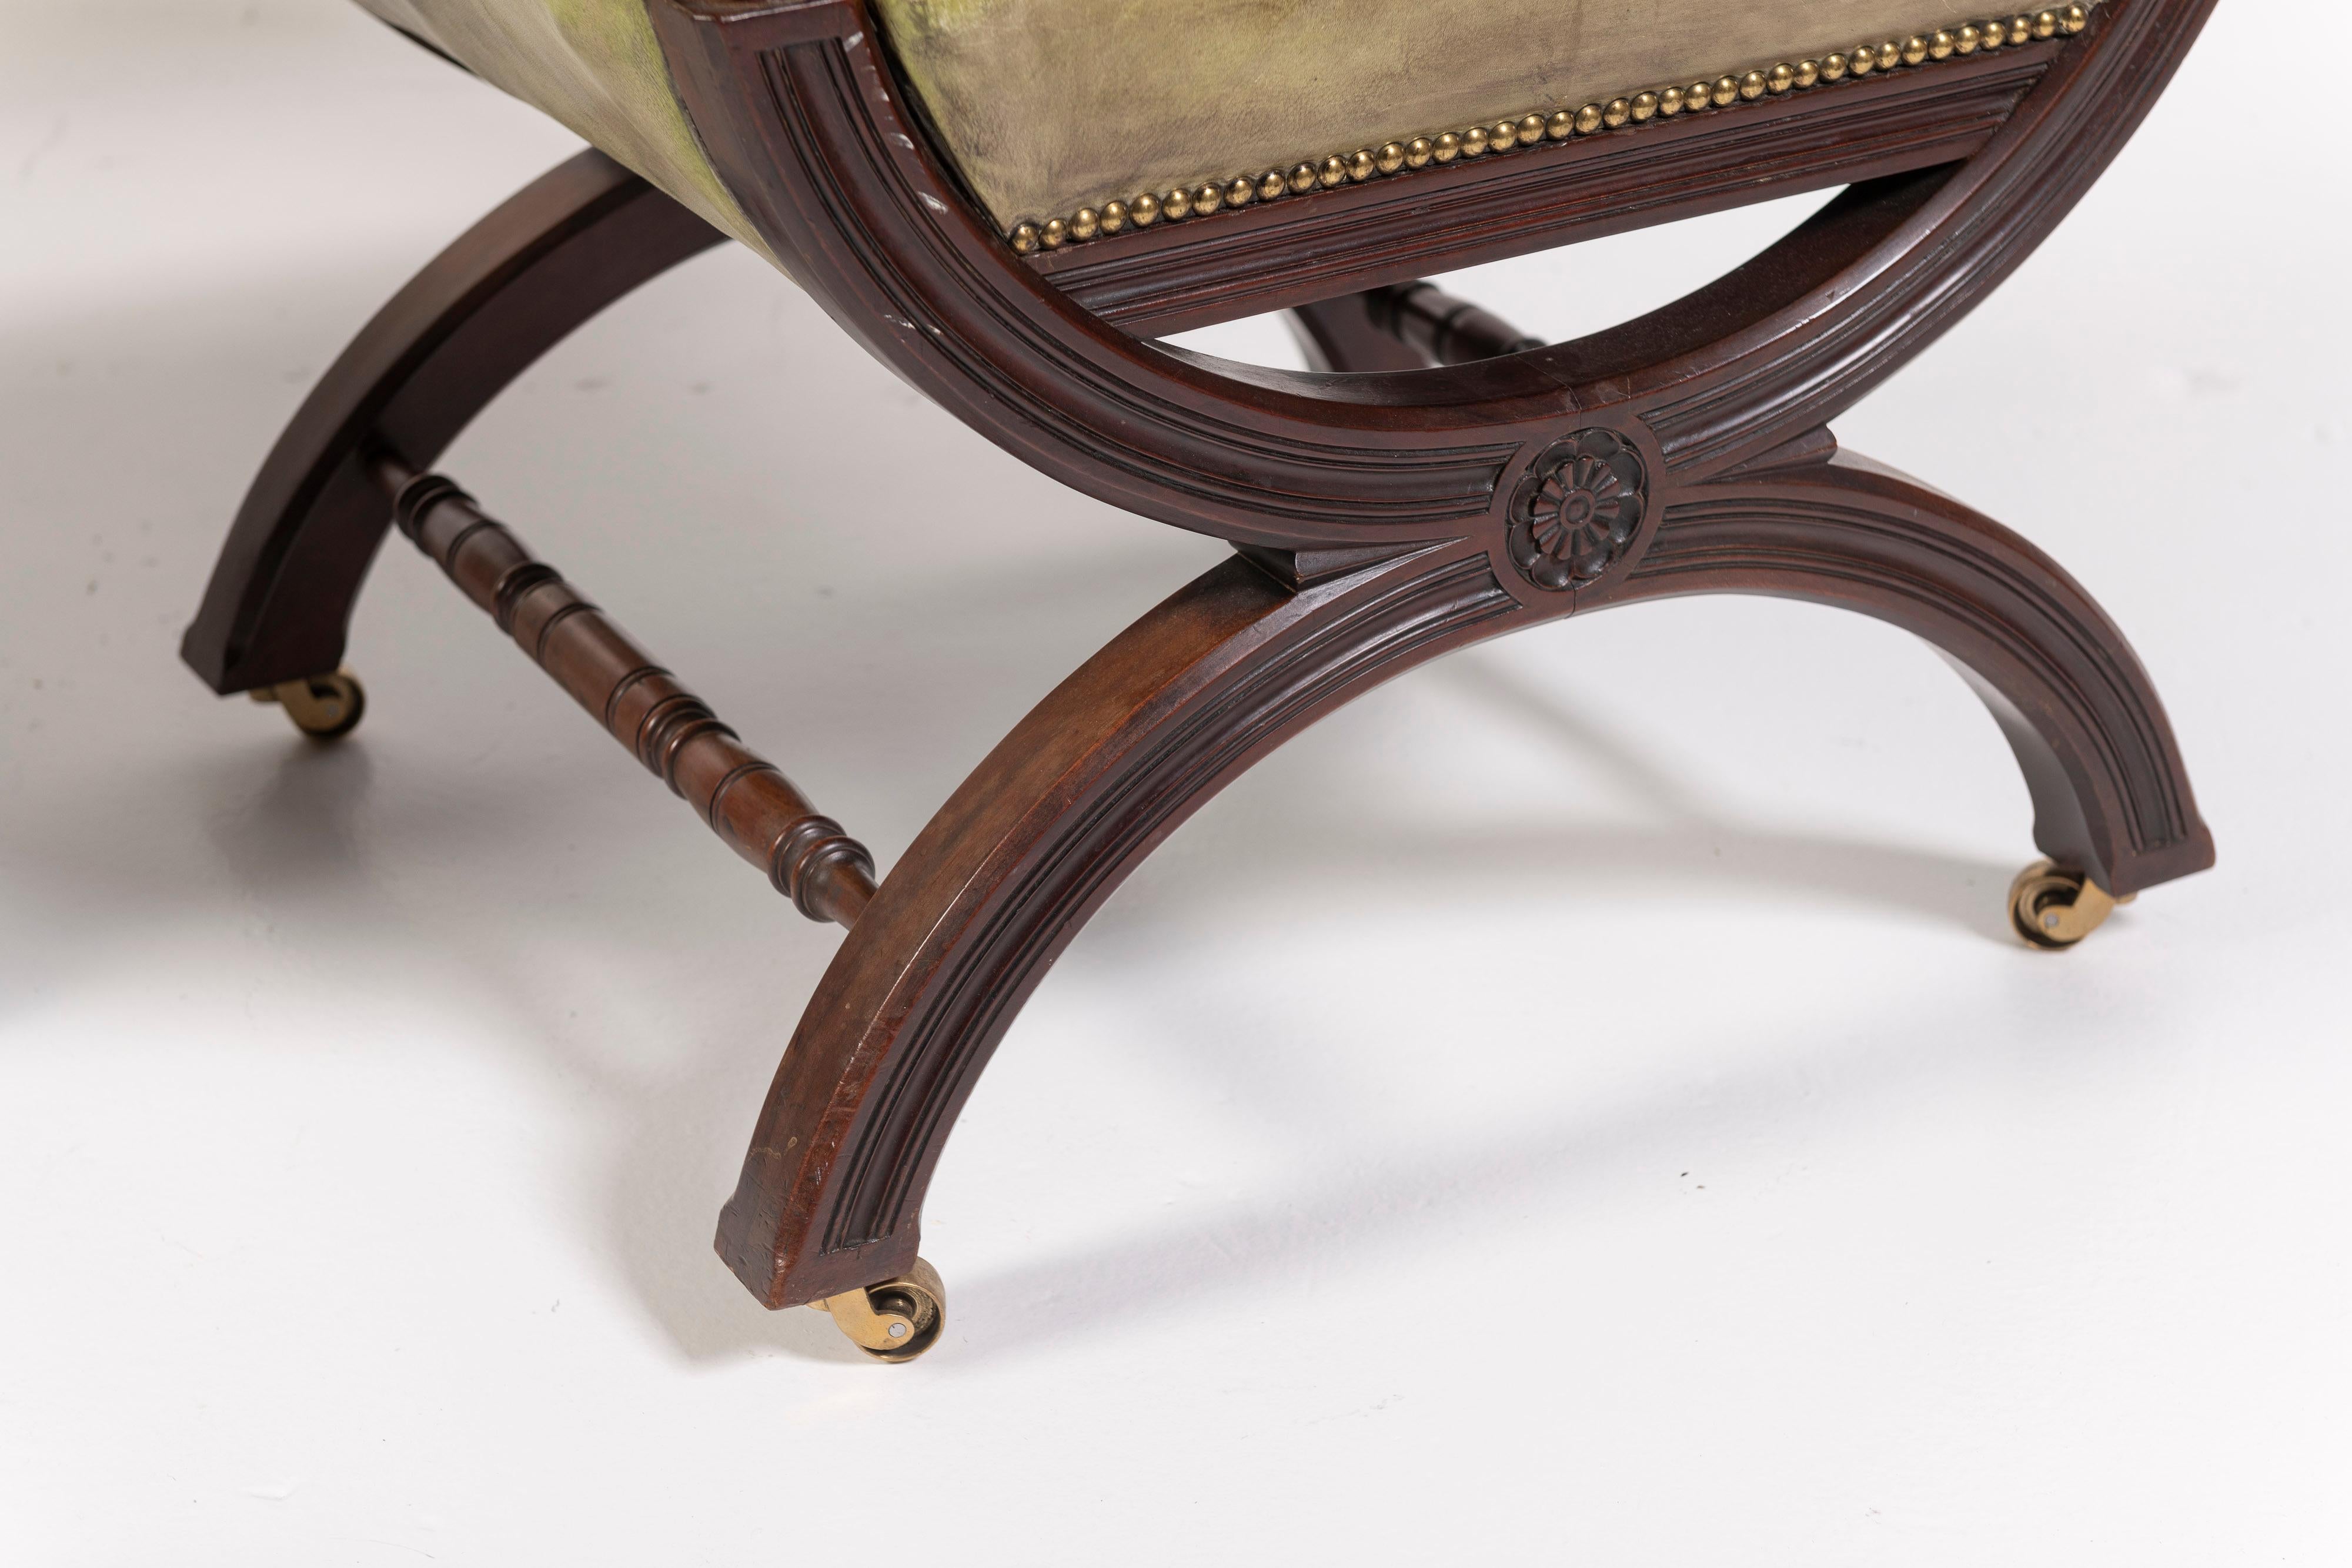 This fantastic pair of 19th Century English arm chairs, with a variation of the x-frame design, are made of mahogany and upholstered in an olive green, patinated leather. The carved legs, hand-nailed decorative studding in brass and the distinctive